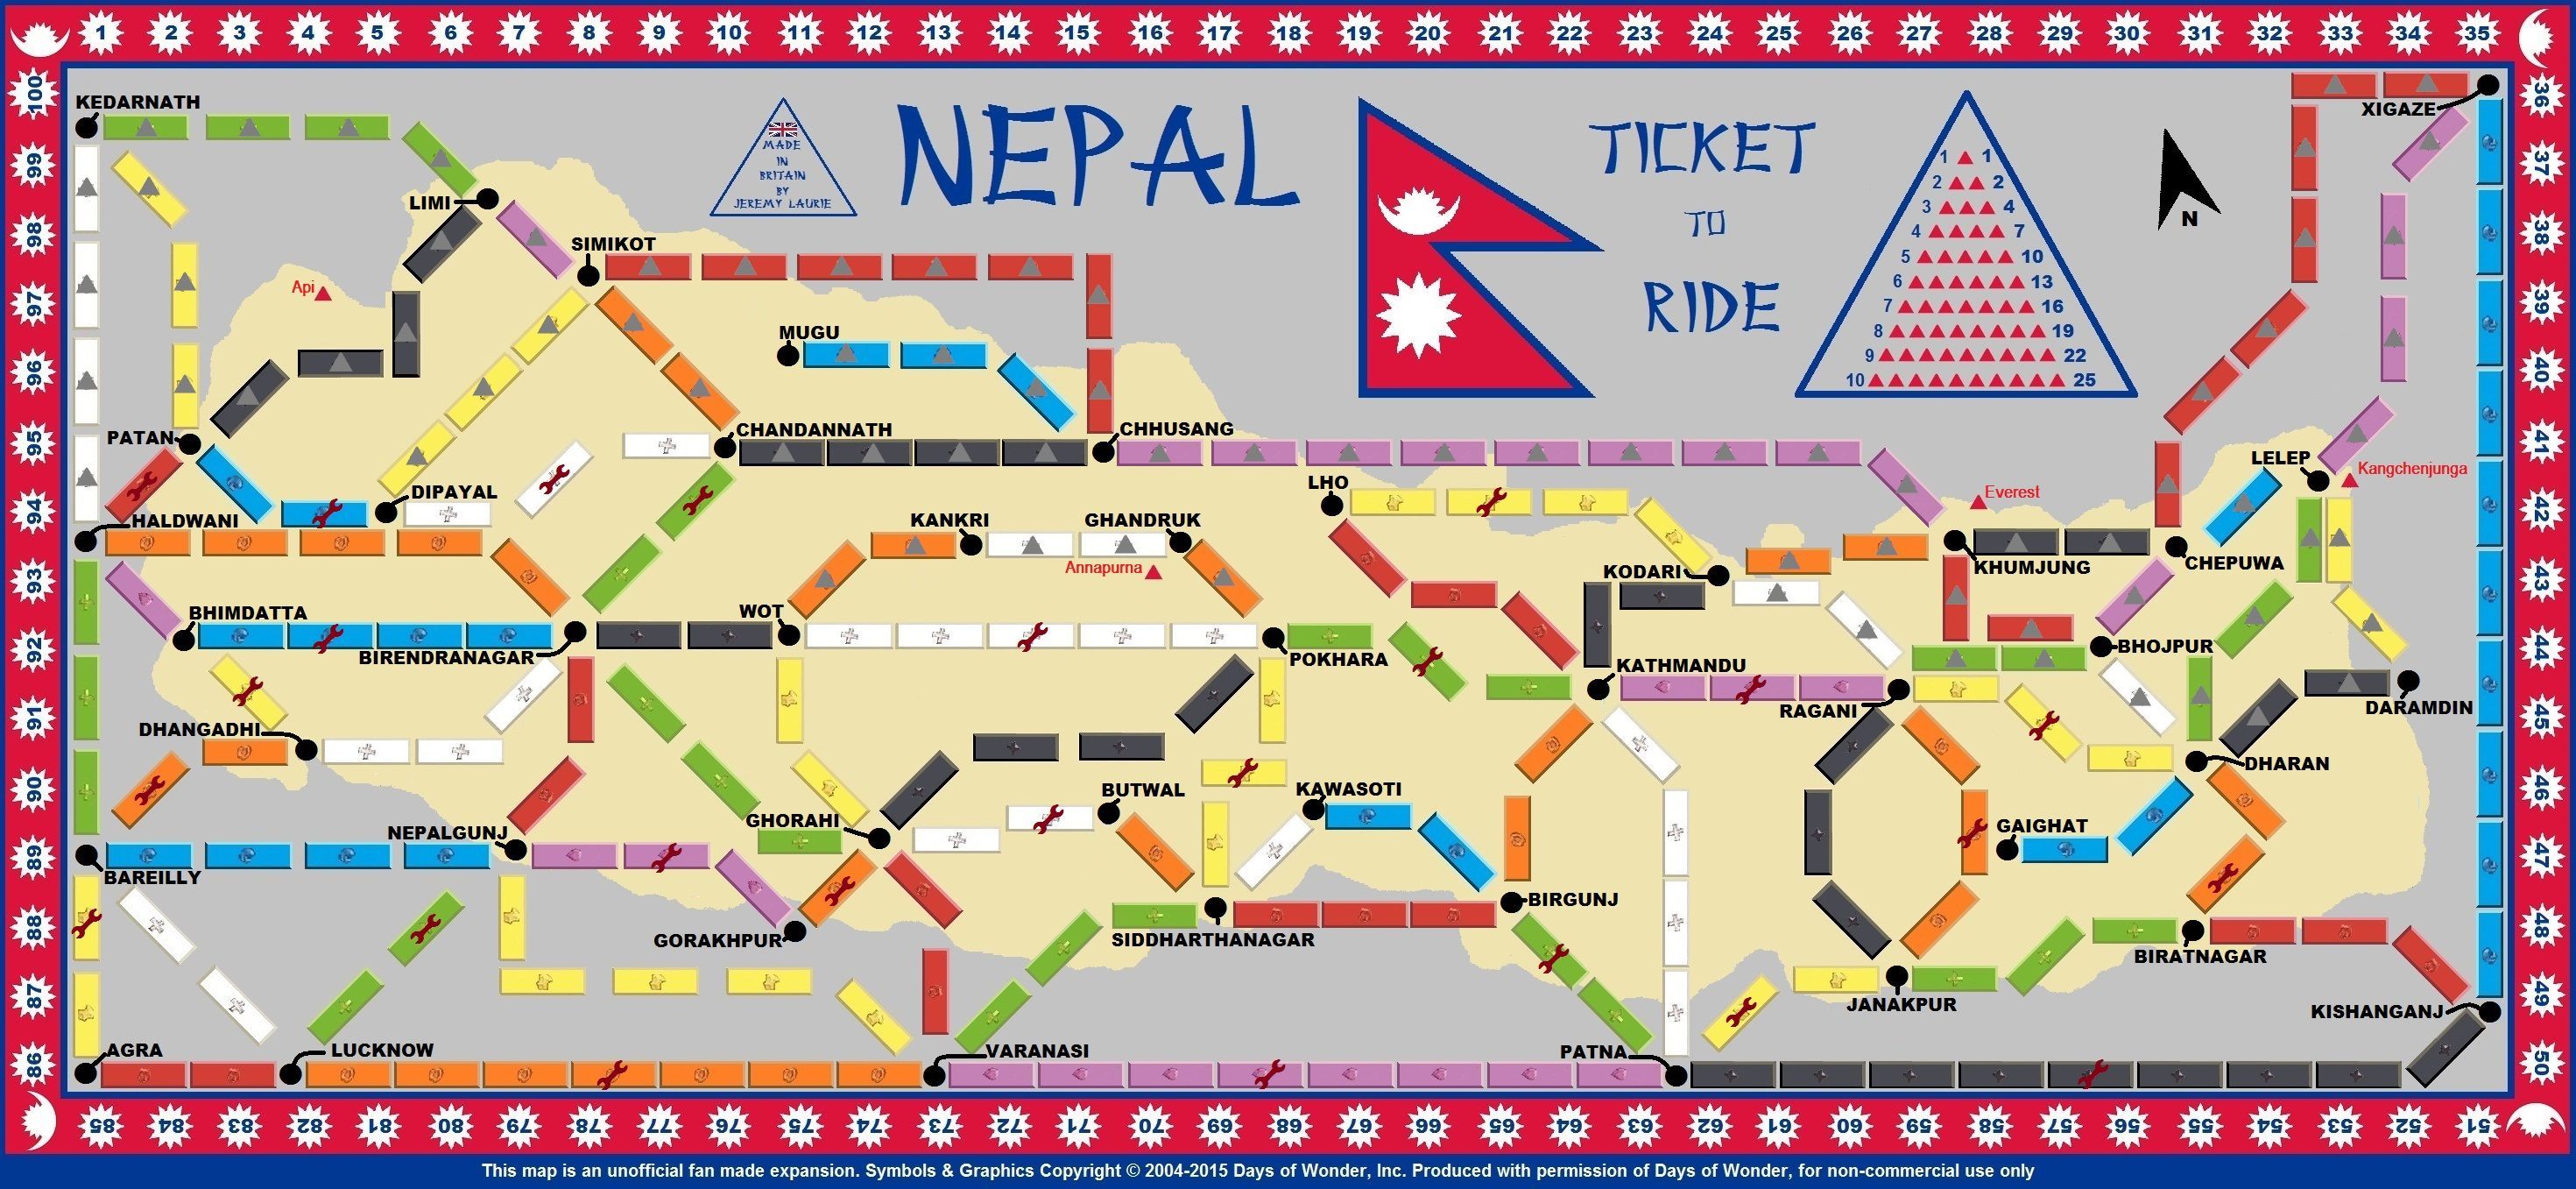 Nepal (fan expansion of Ticket to Ride)